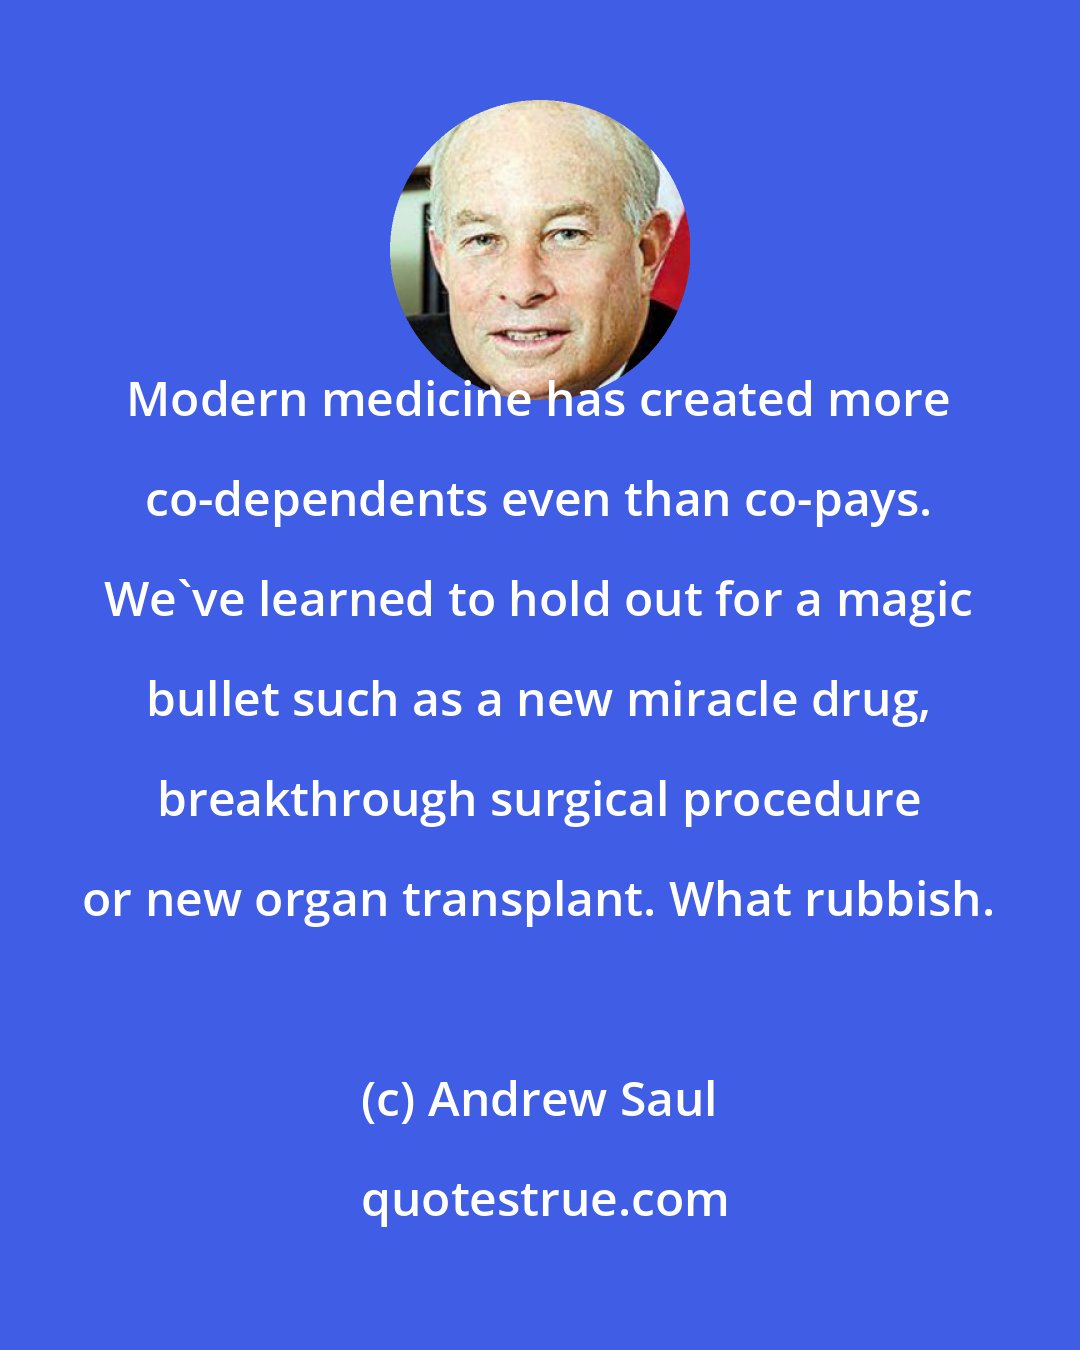 Andrew Saul: Modern medicine has created more co-dependents even than co-pays. We've learned to hold out for a magic bullet such as a new miracle drug, breakthrough surgical procedure or new organ transplant. What rubbish.